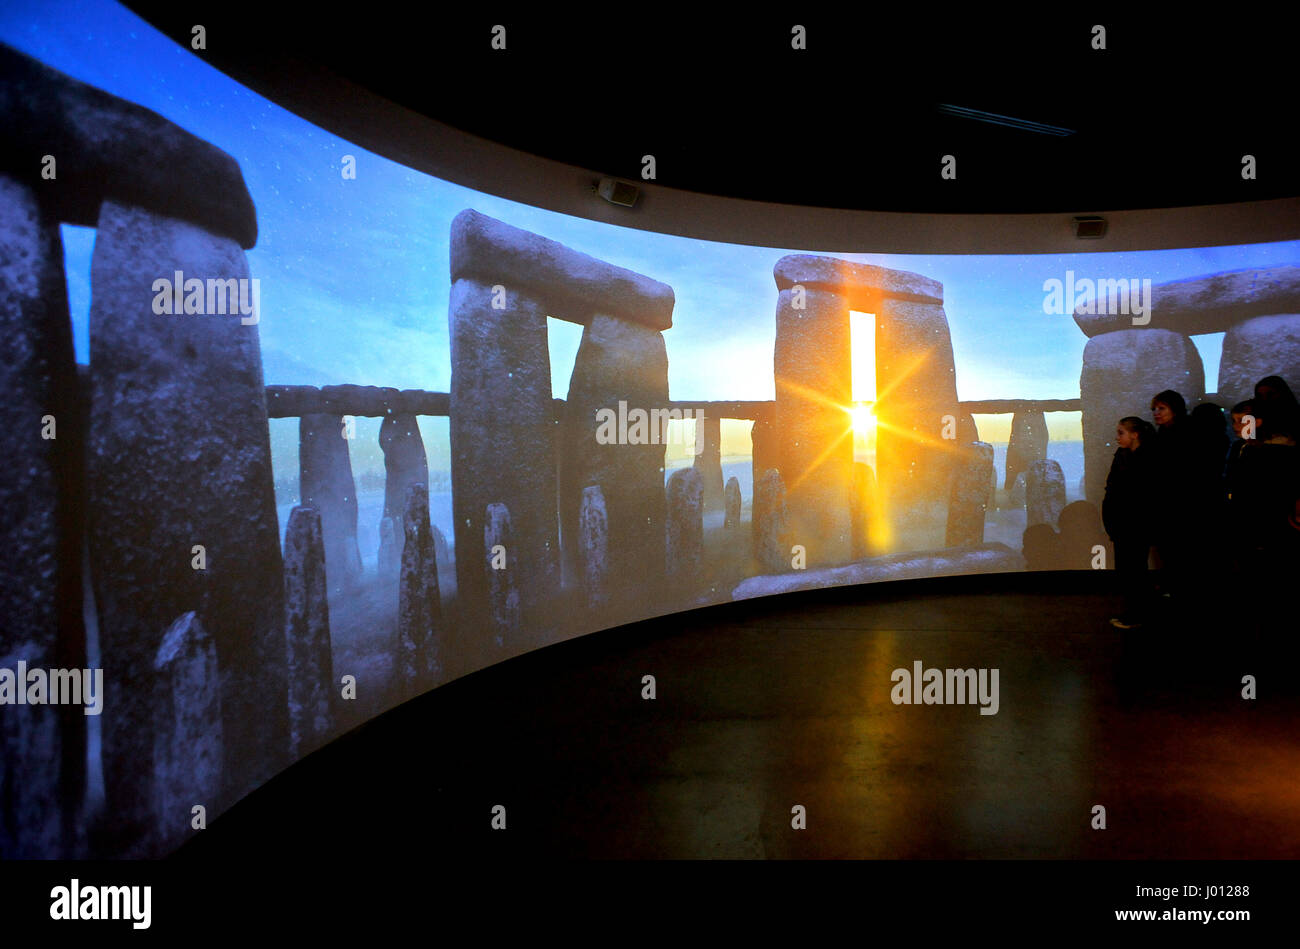 Summer Solstice display, Stonehenge Visitor Centre, England, 2015. The new Visitor Centre run by English Heritage at ancient Stonehenge stone circle. Stock Photo